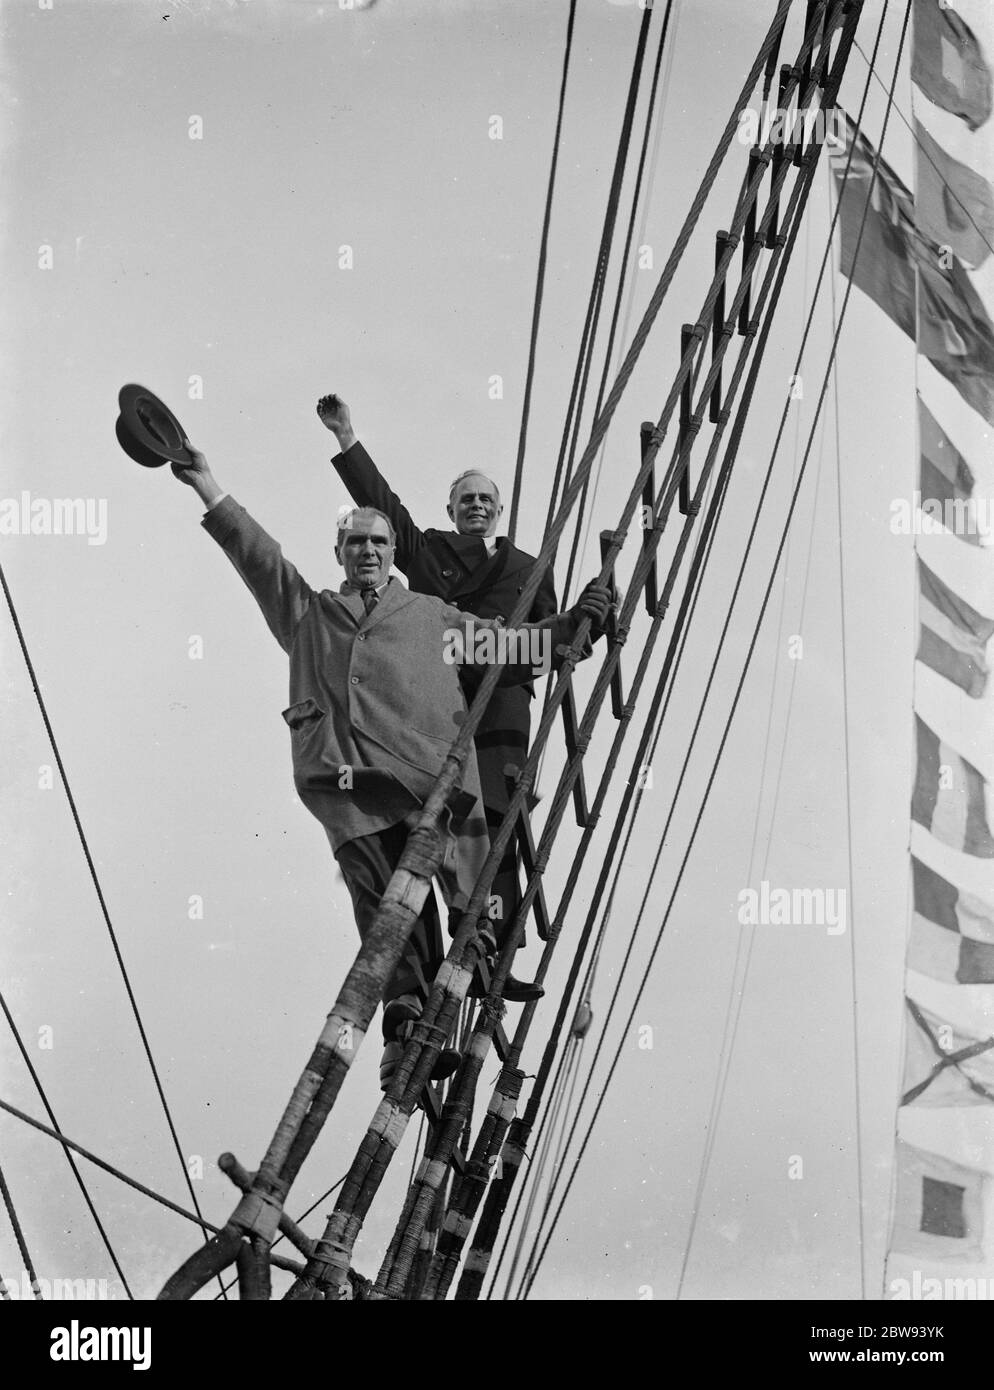 Old salts visit the Cutty Sark in Greenhithe , Kent . Captain R J Woodget and Captain A S Woodget wave from up the rigging . 1938 . Stock Photo